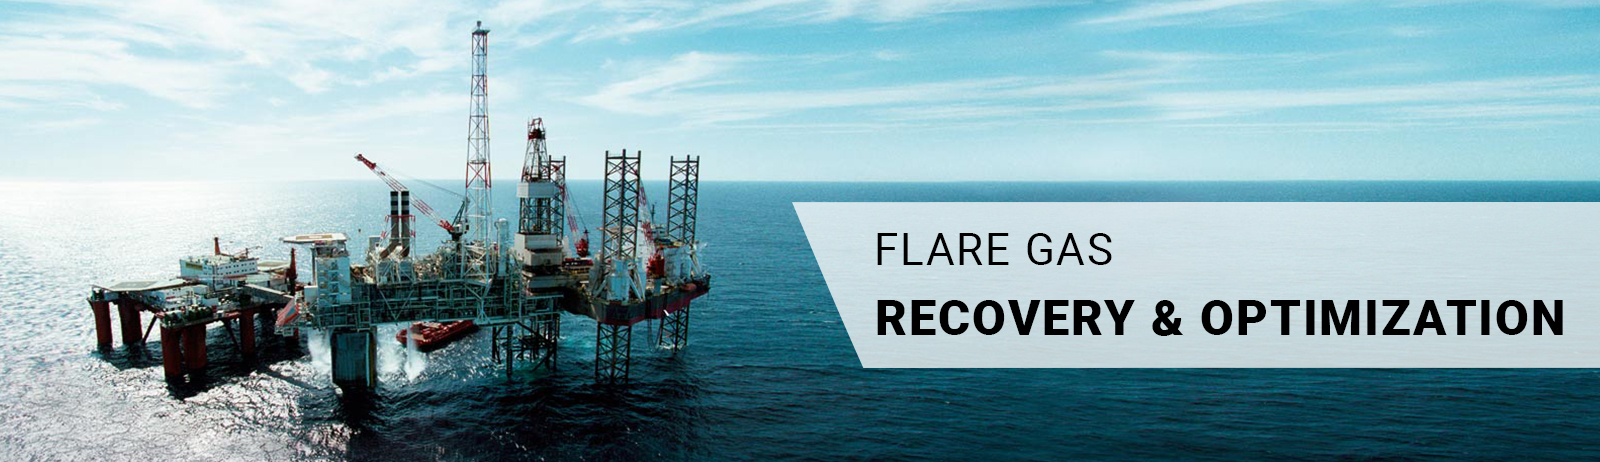 Flare Gas Recovery & Optimisation